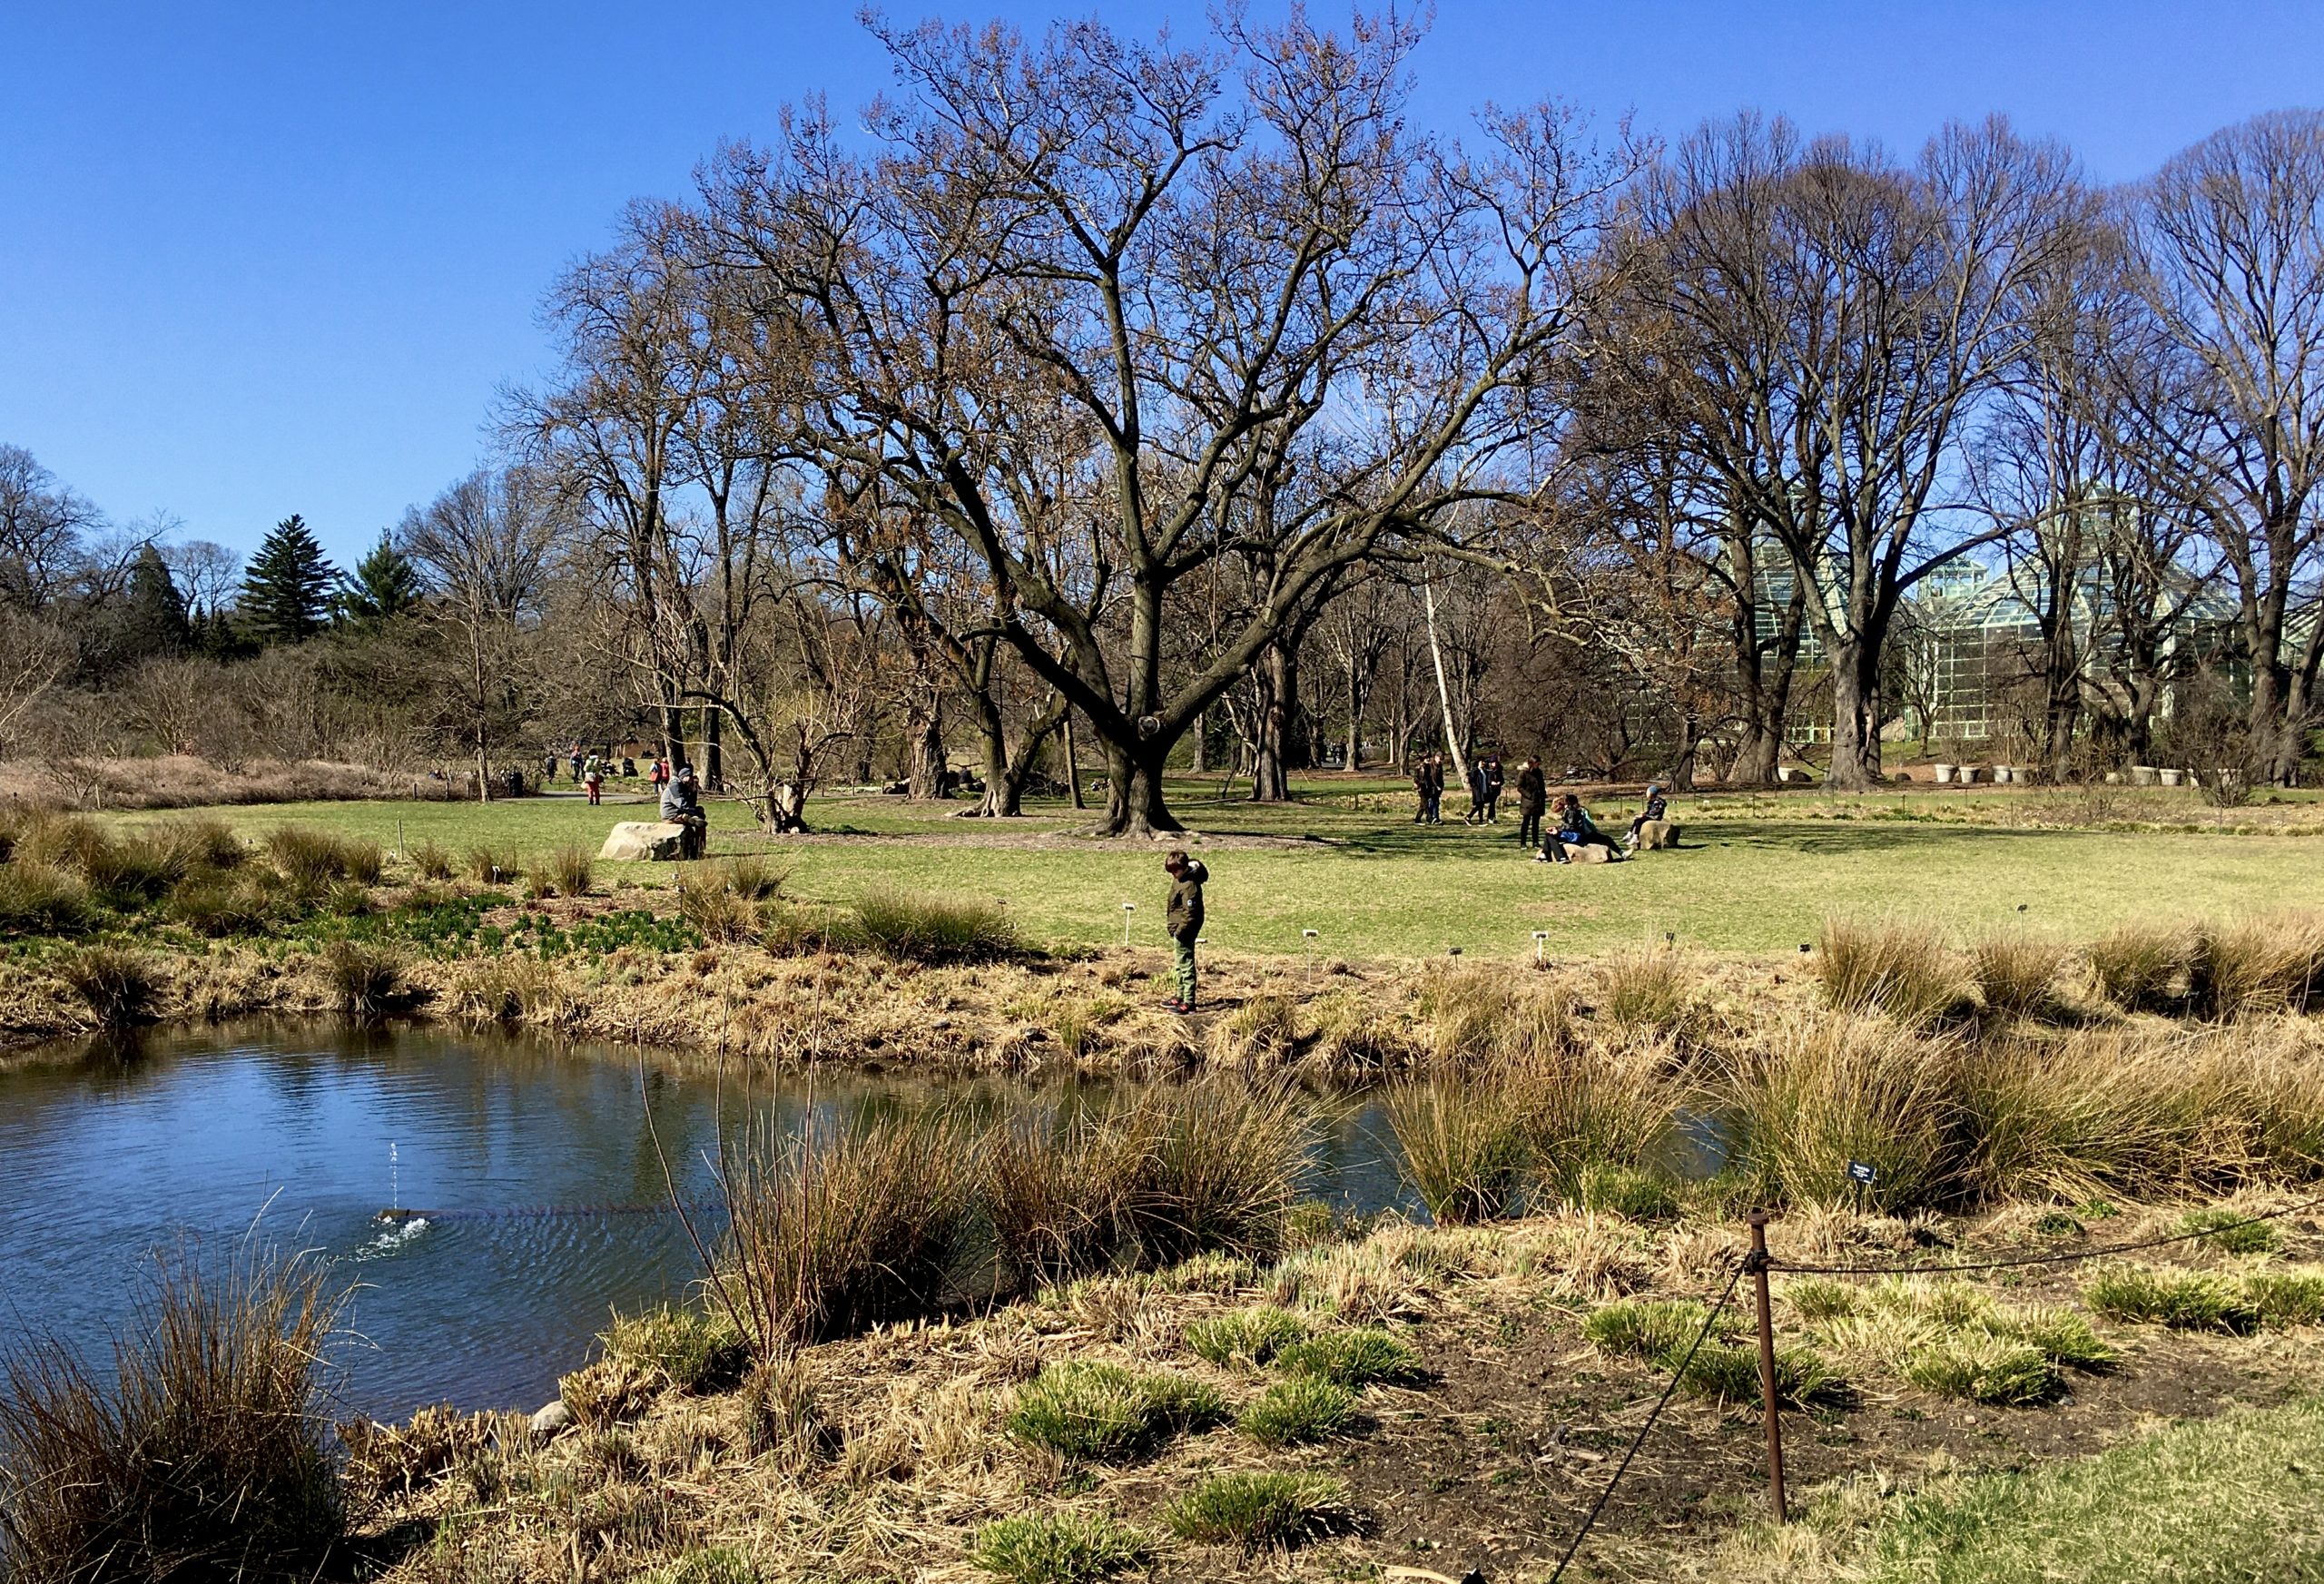 Visitors enjoyed a tranquil day before Brooklyn Botanic Garden closed to help prevent the spread of the coronavirus. Photo: Lore Croghan/Brooklyn Eagle